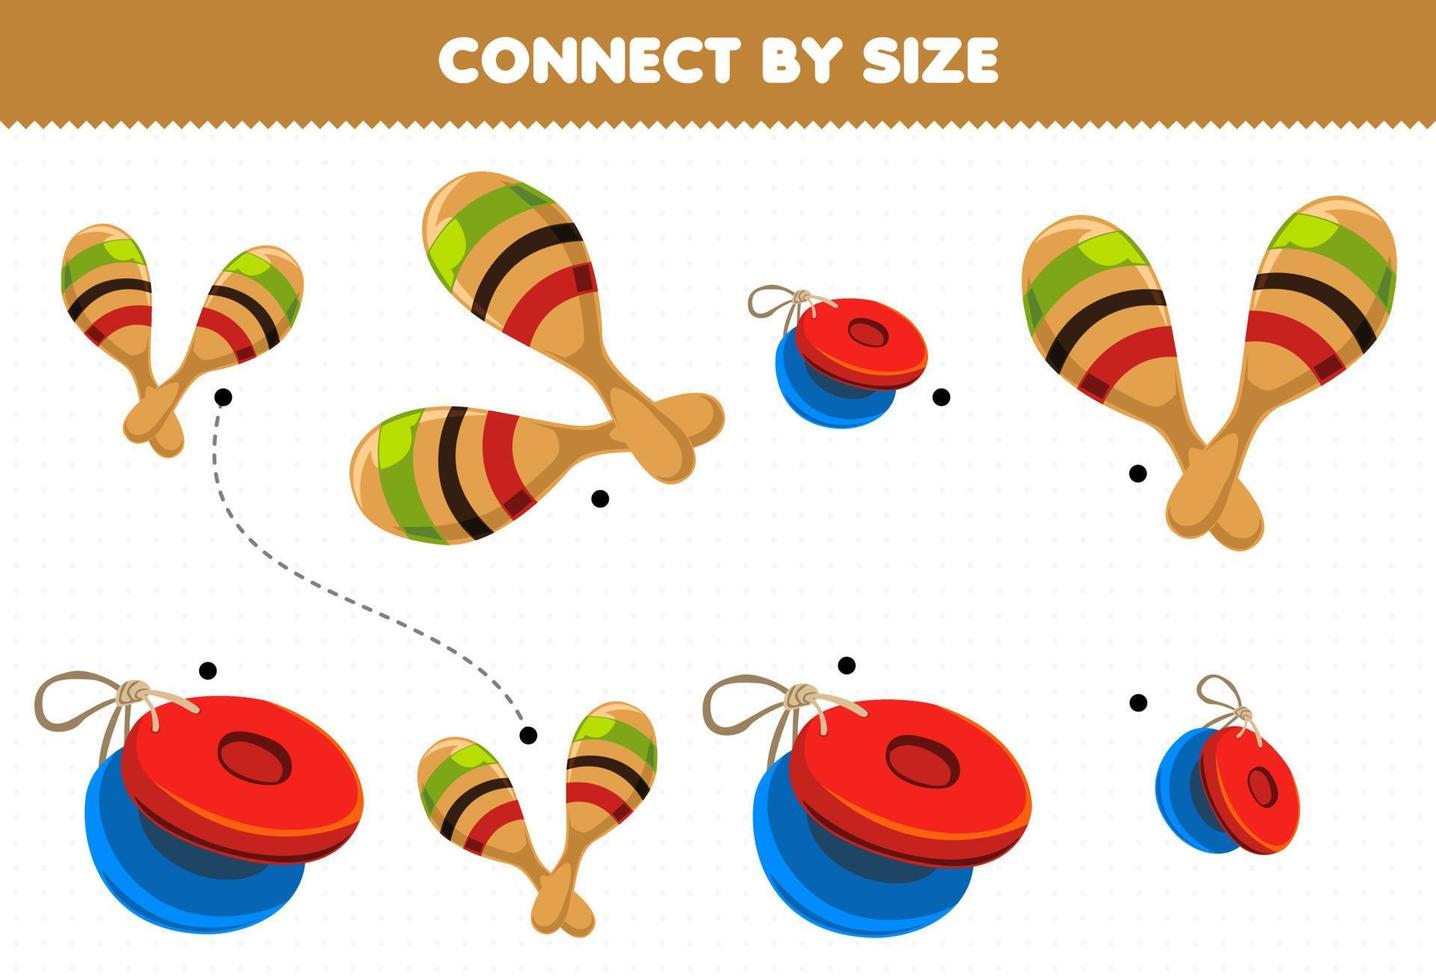 Educational game for kids connect by the size of cartoon music instrument castanet and maracas printable worksheet vector